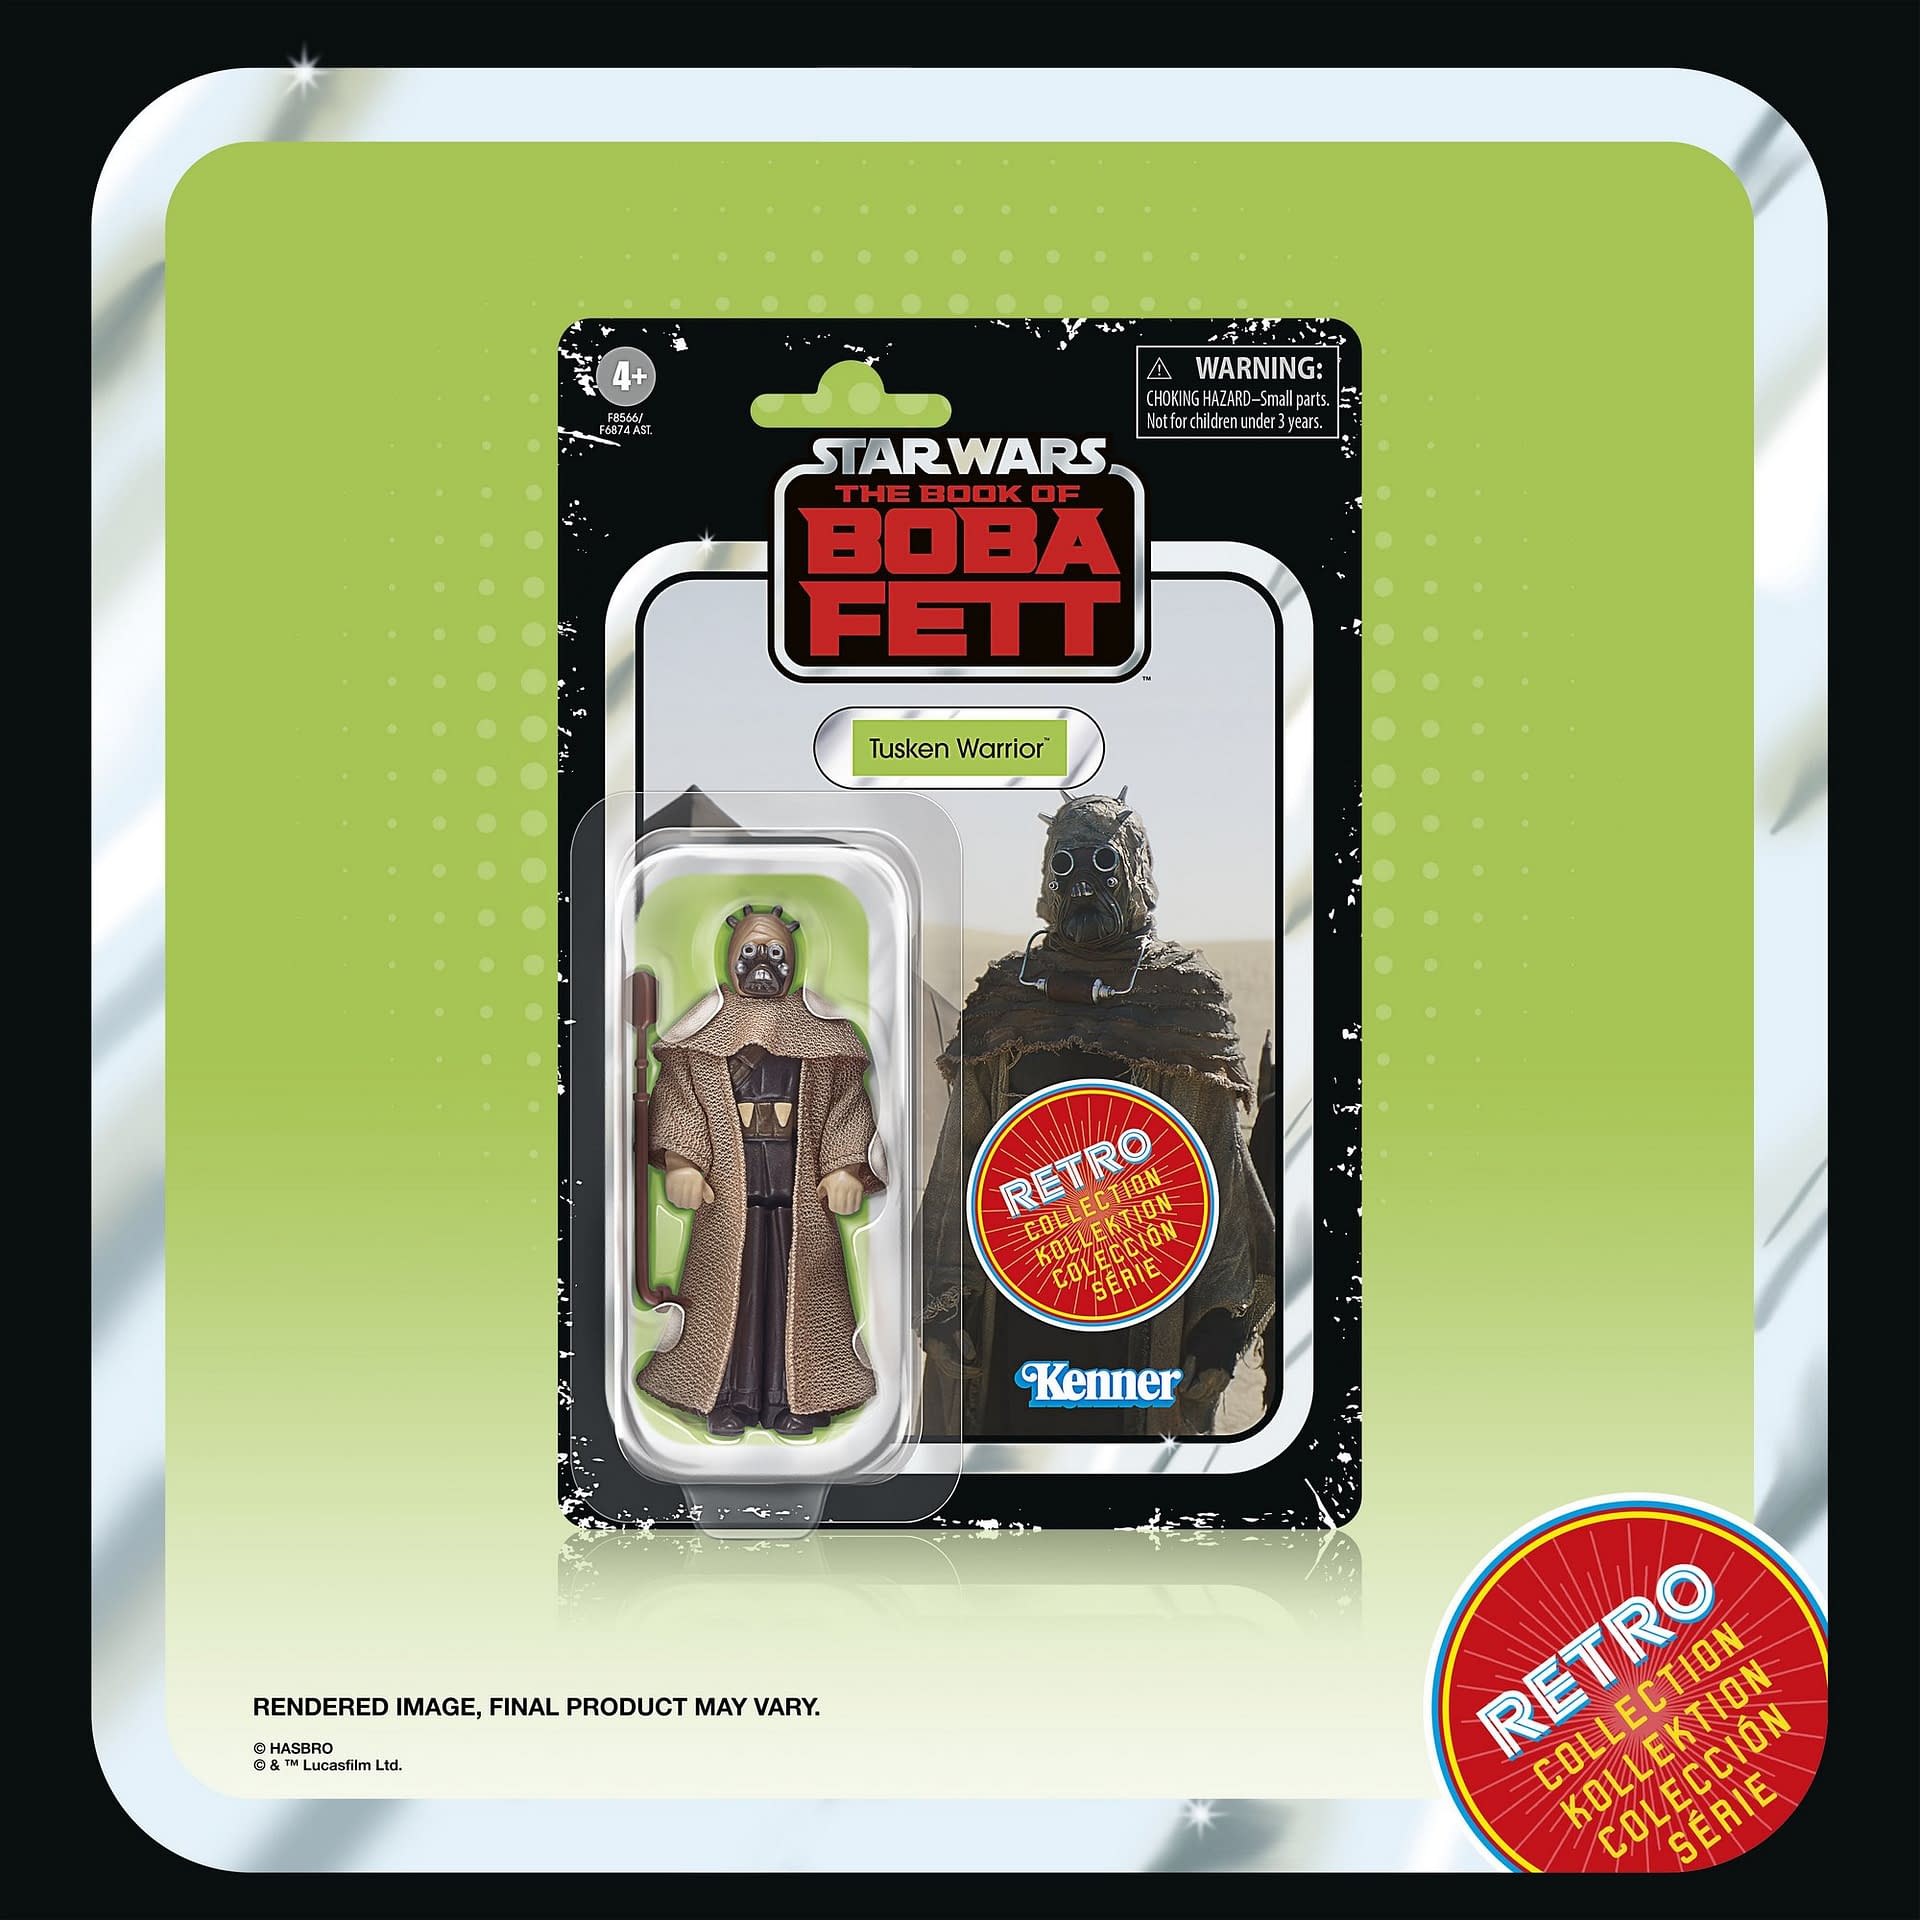 New Star Wars The Book of Boba Fett Retro Collection Figures Revealed